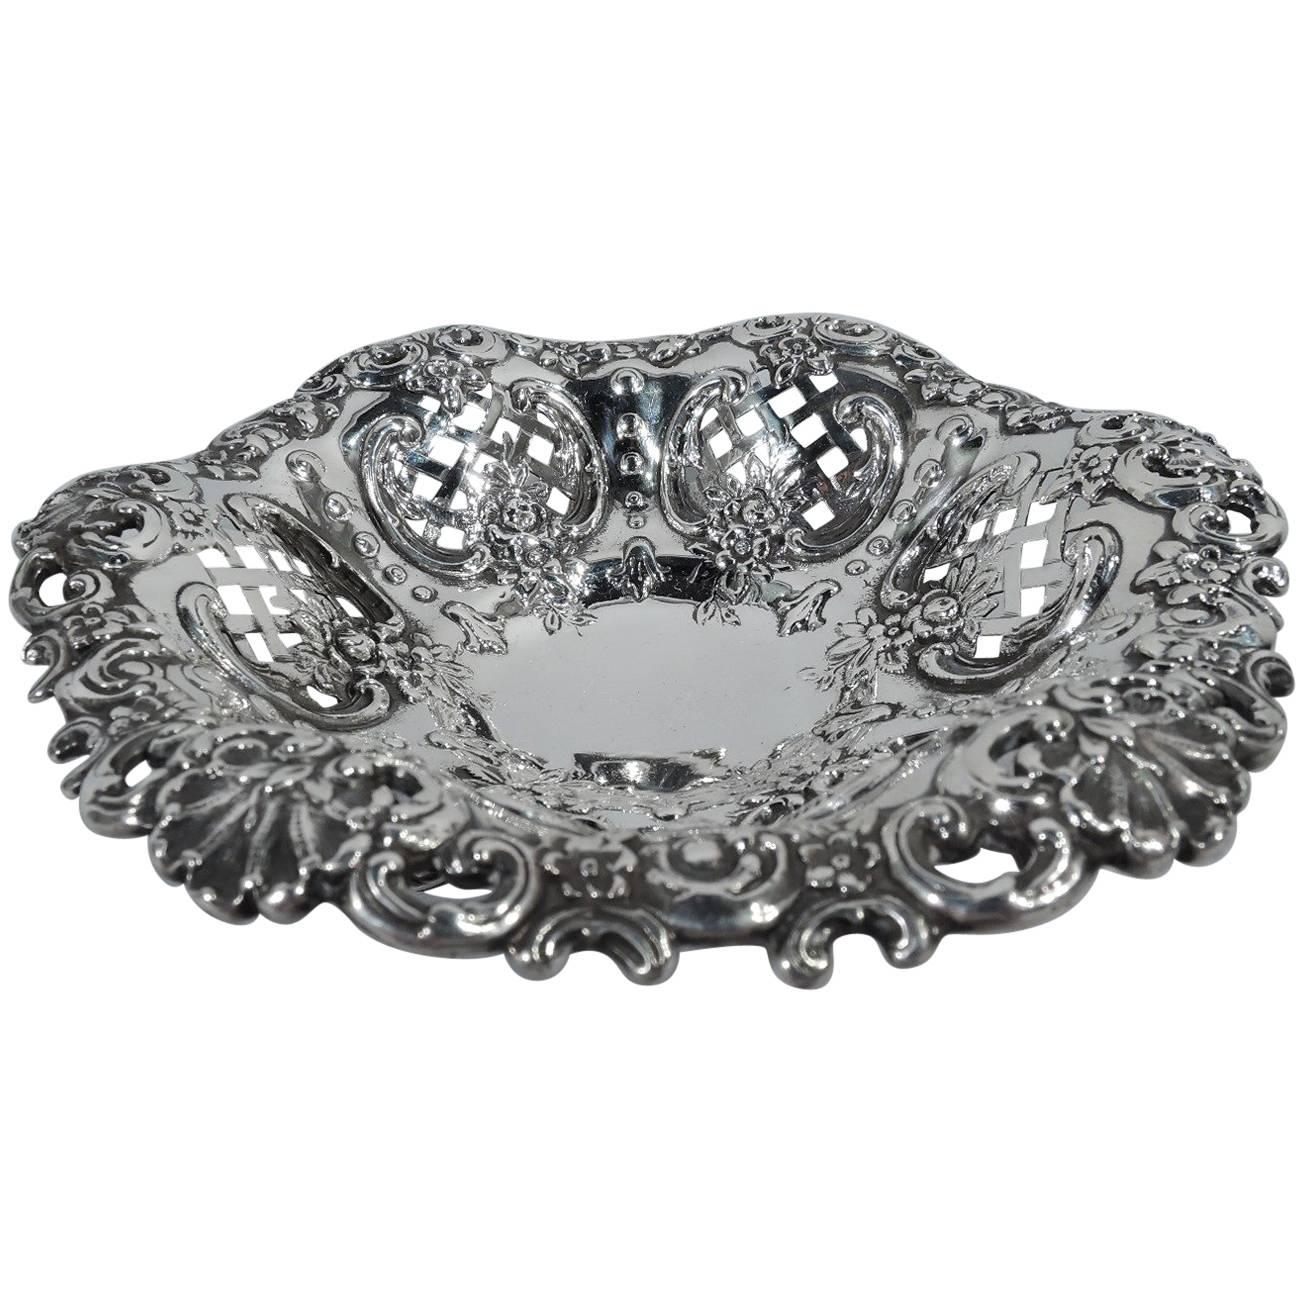 Small and Sumptuous Sterling Silver Bowl by Tiffany